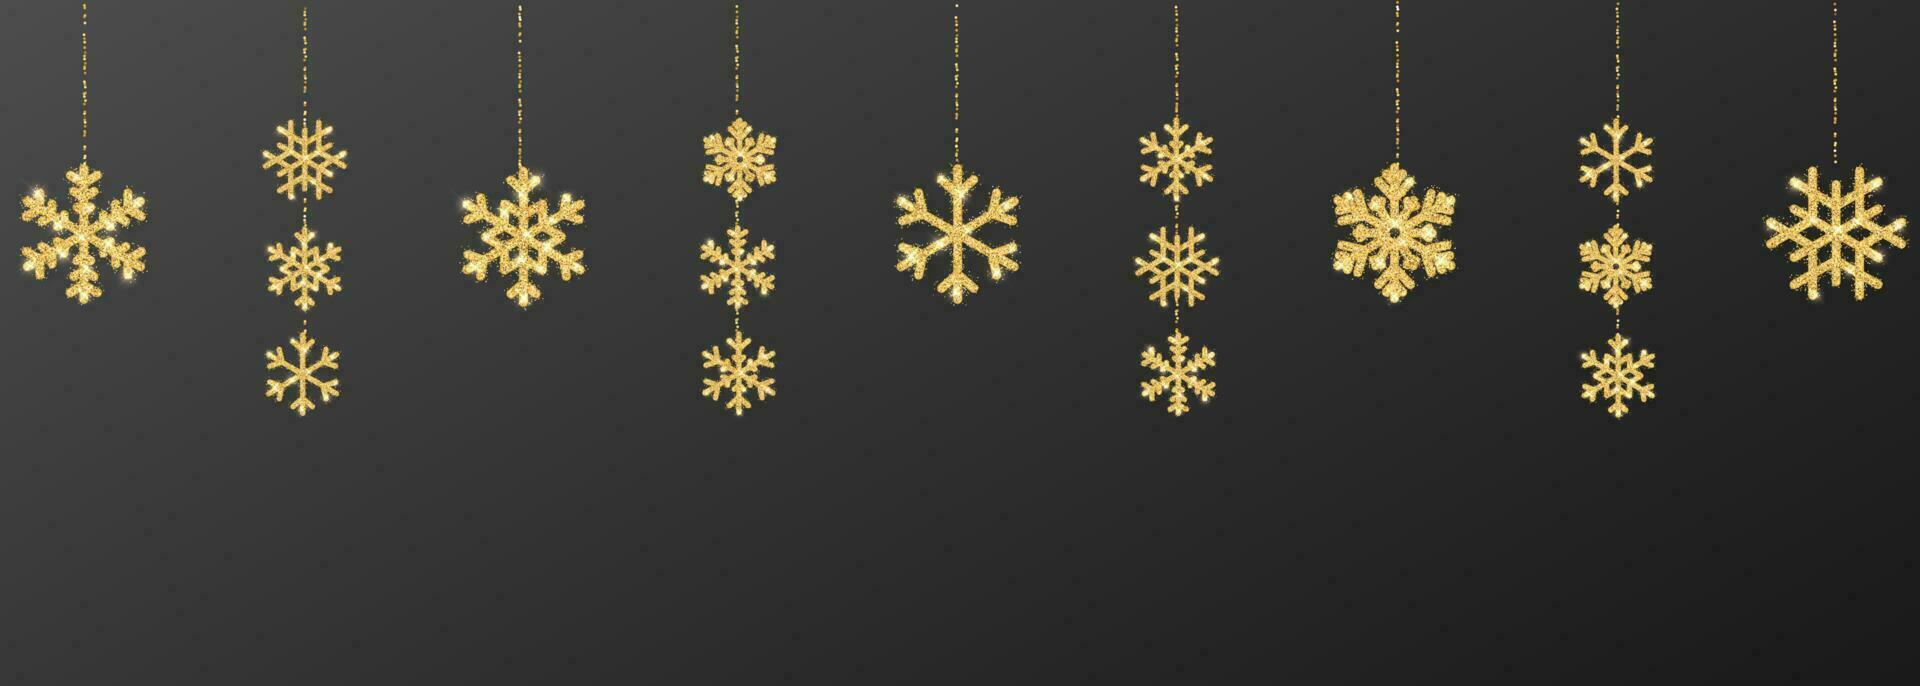 Christmas or New Year golden snowflake decoration garland on black background. Hanging glitter snowflake. Vector illustration